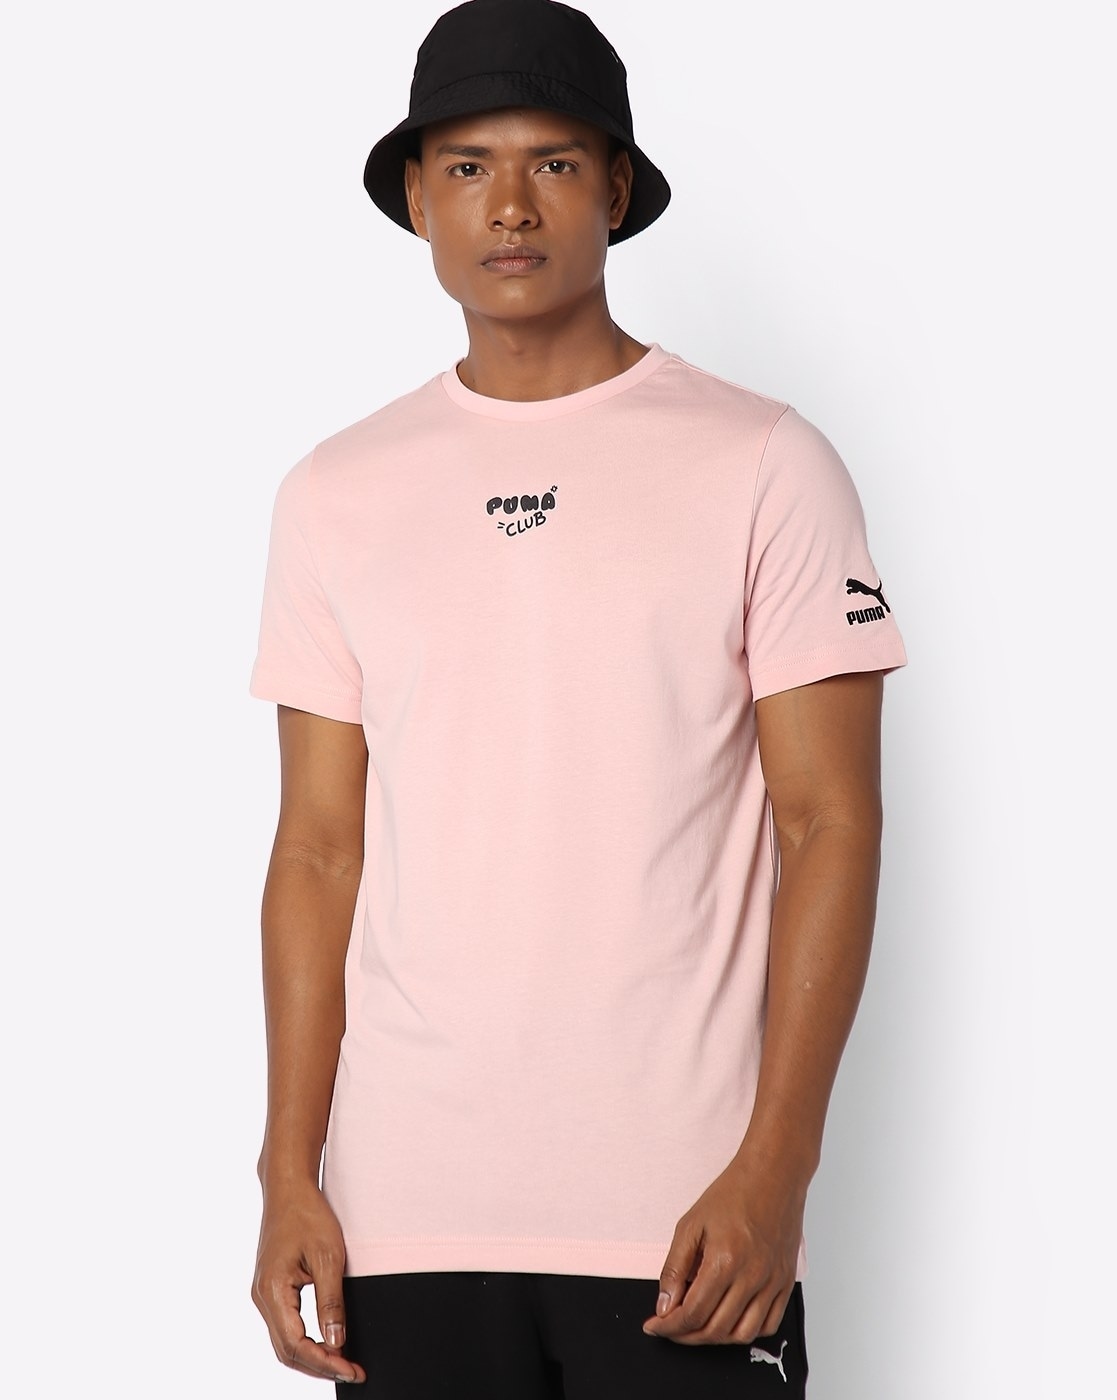 by Tshirts Online Buy Pink Puma Men for